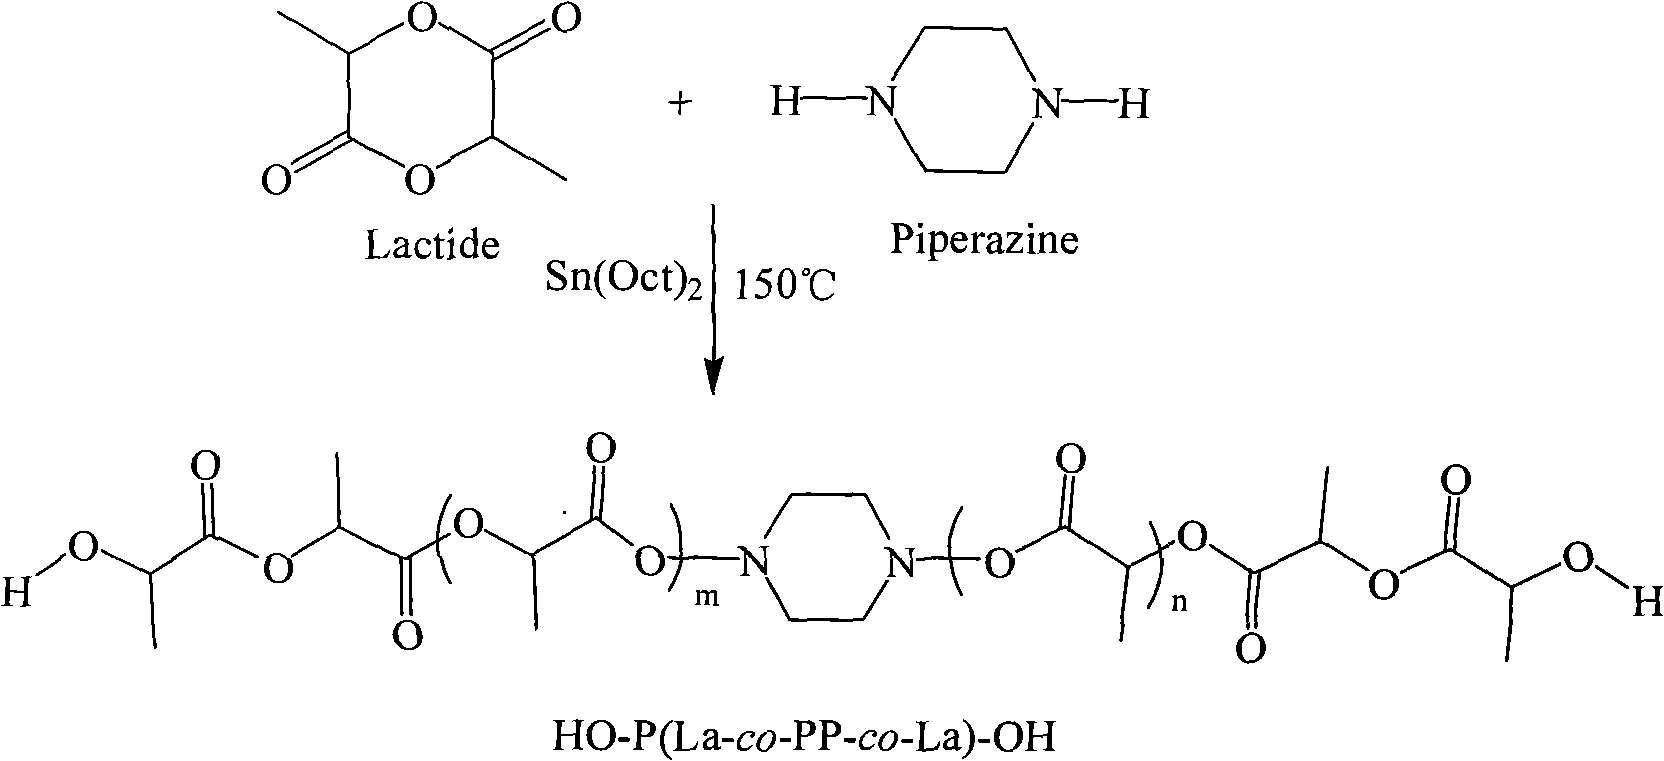 Hydroxyl telechelic polyester material based on piperazine block and preparation method thereof